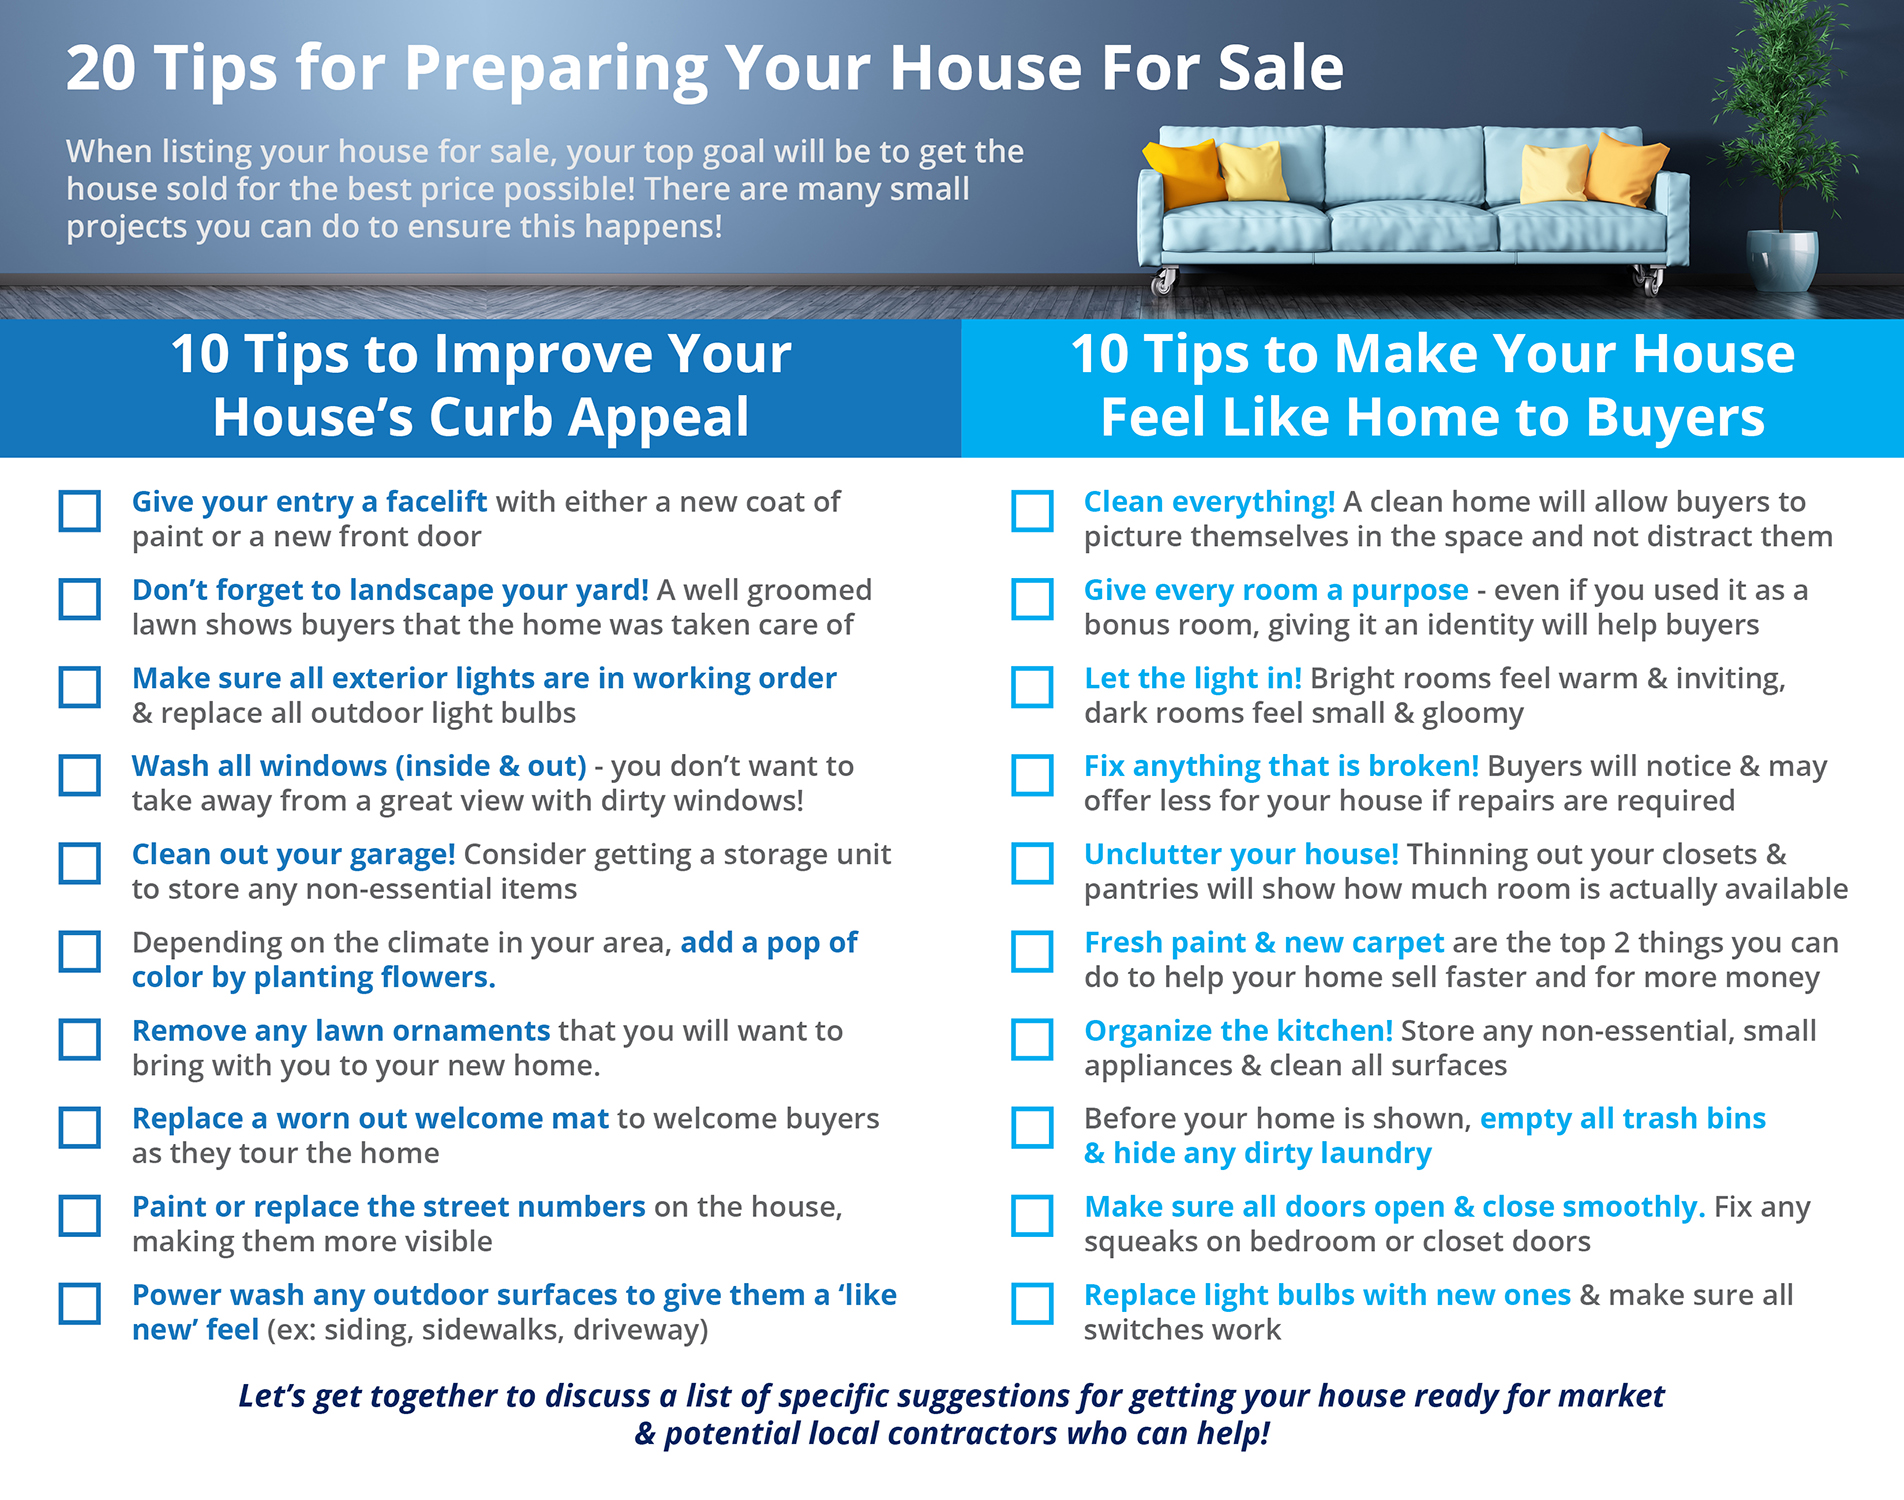 20 Tips For Preparing Your House For Sale | Simplifying The Market